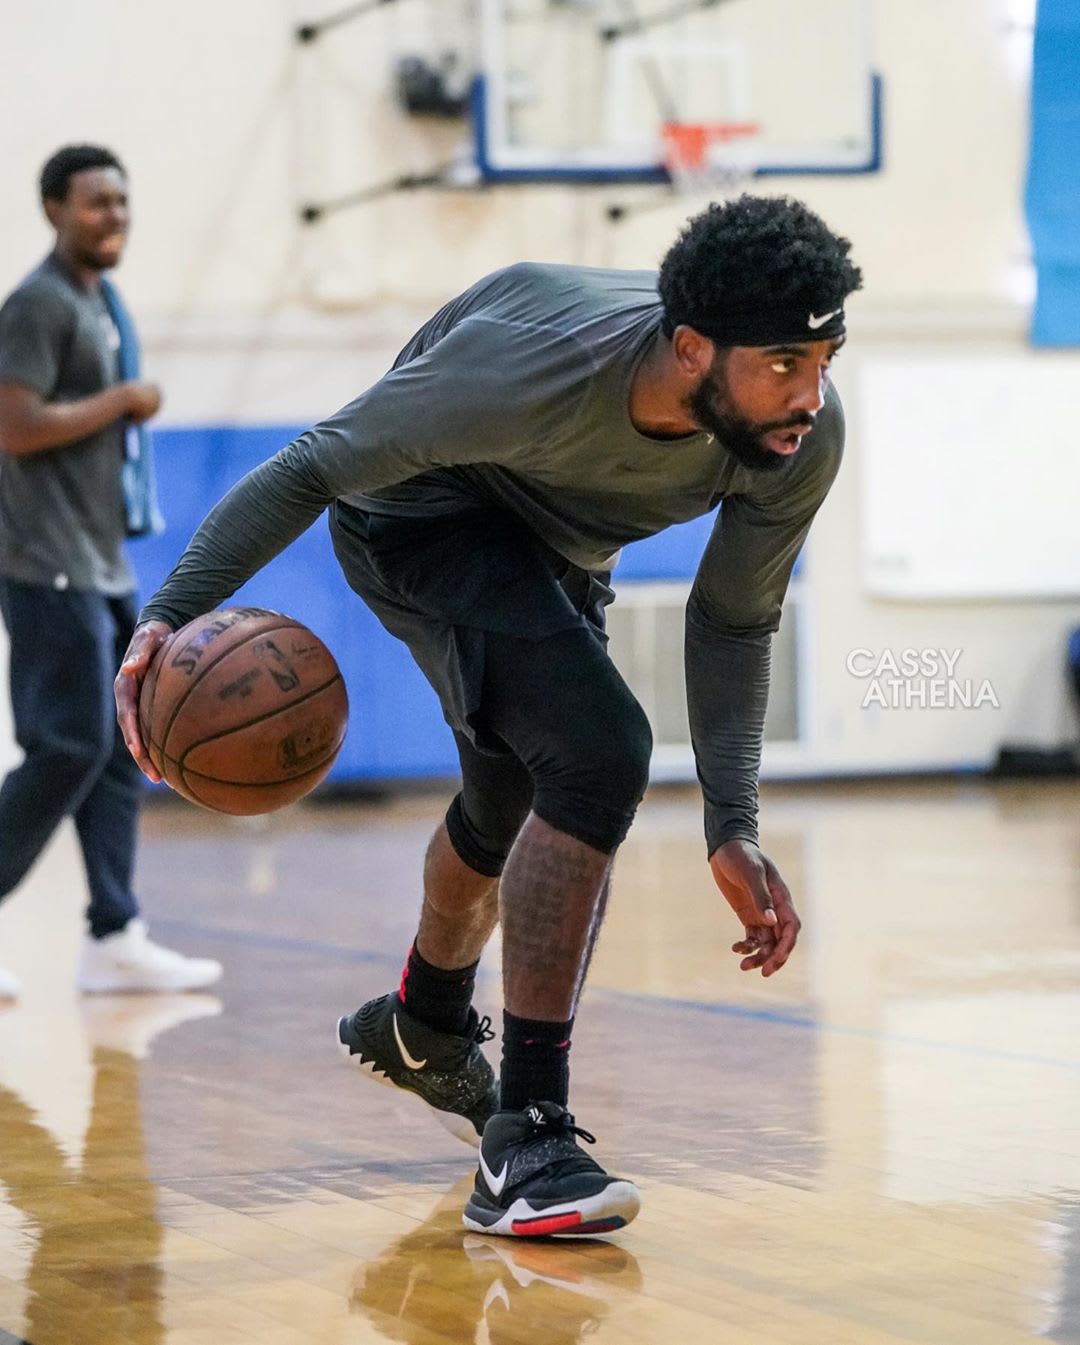 kyrie irving wearing kyrie 6 online -